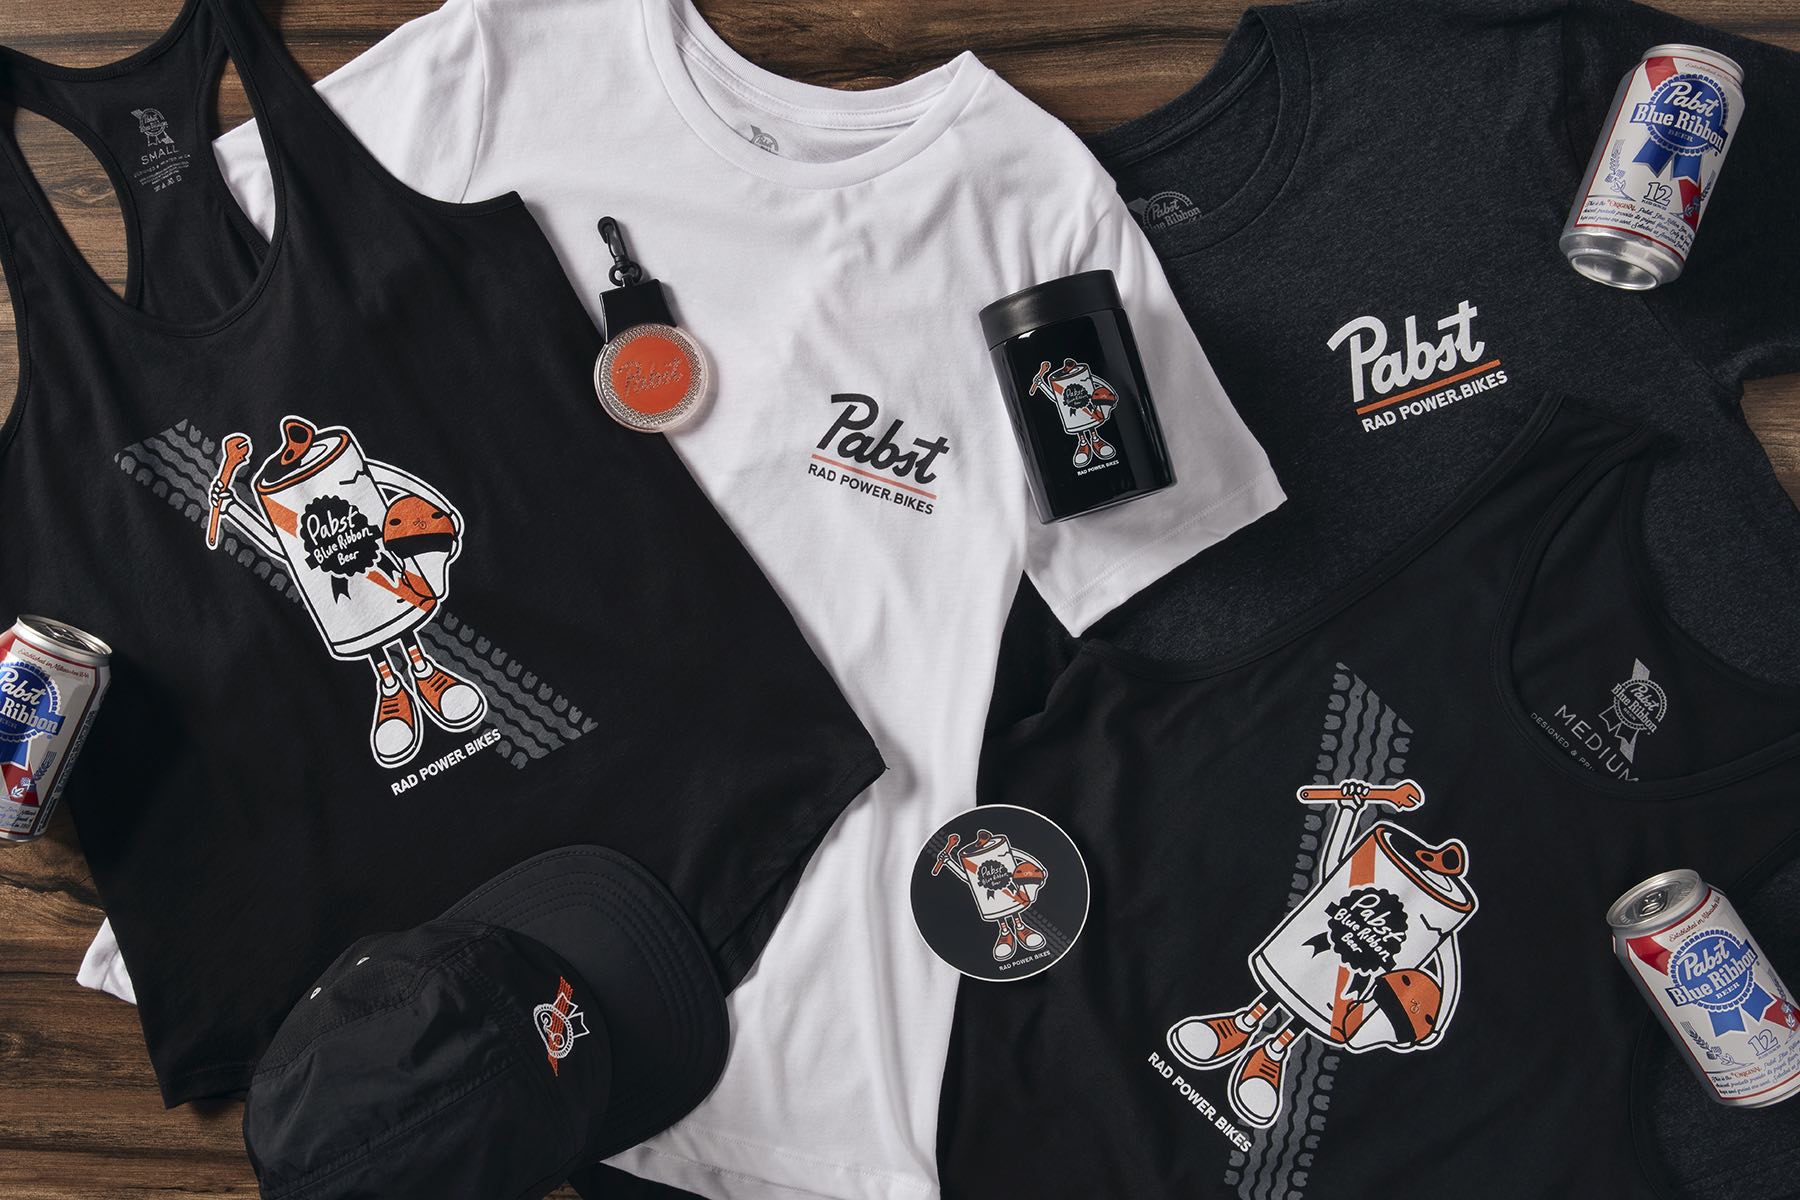 A collection of Rad Power Bikes X Pabst Blue Ribbon themed apparel and accessories.